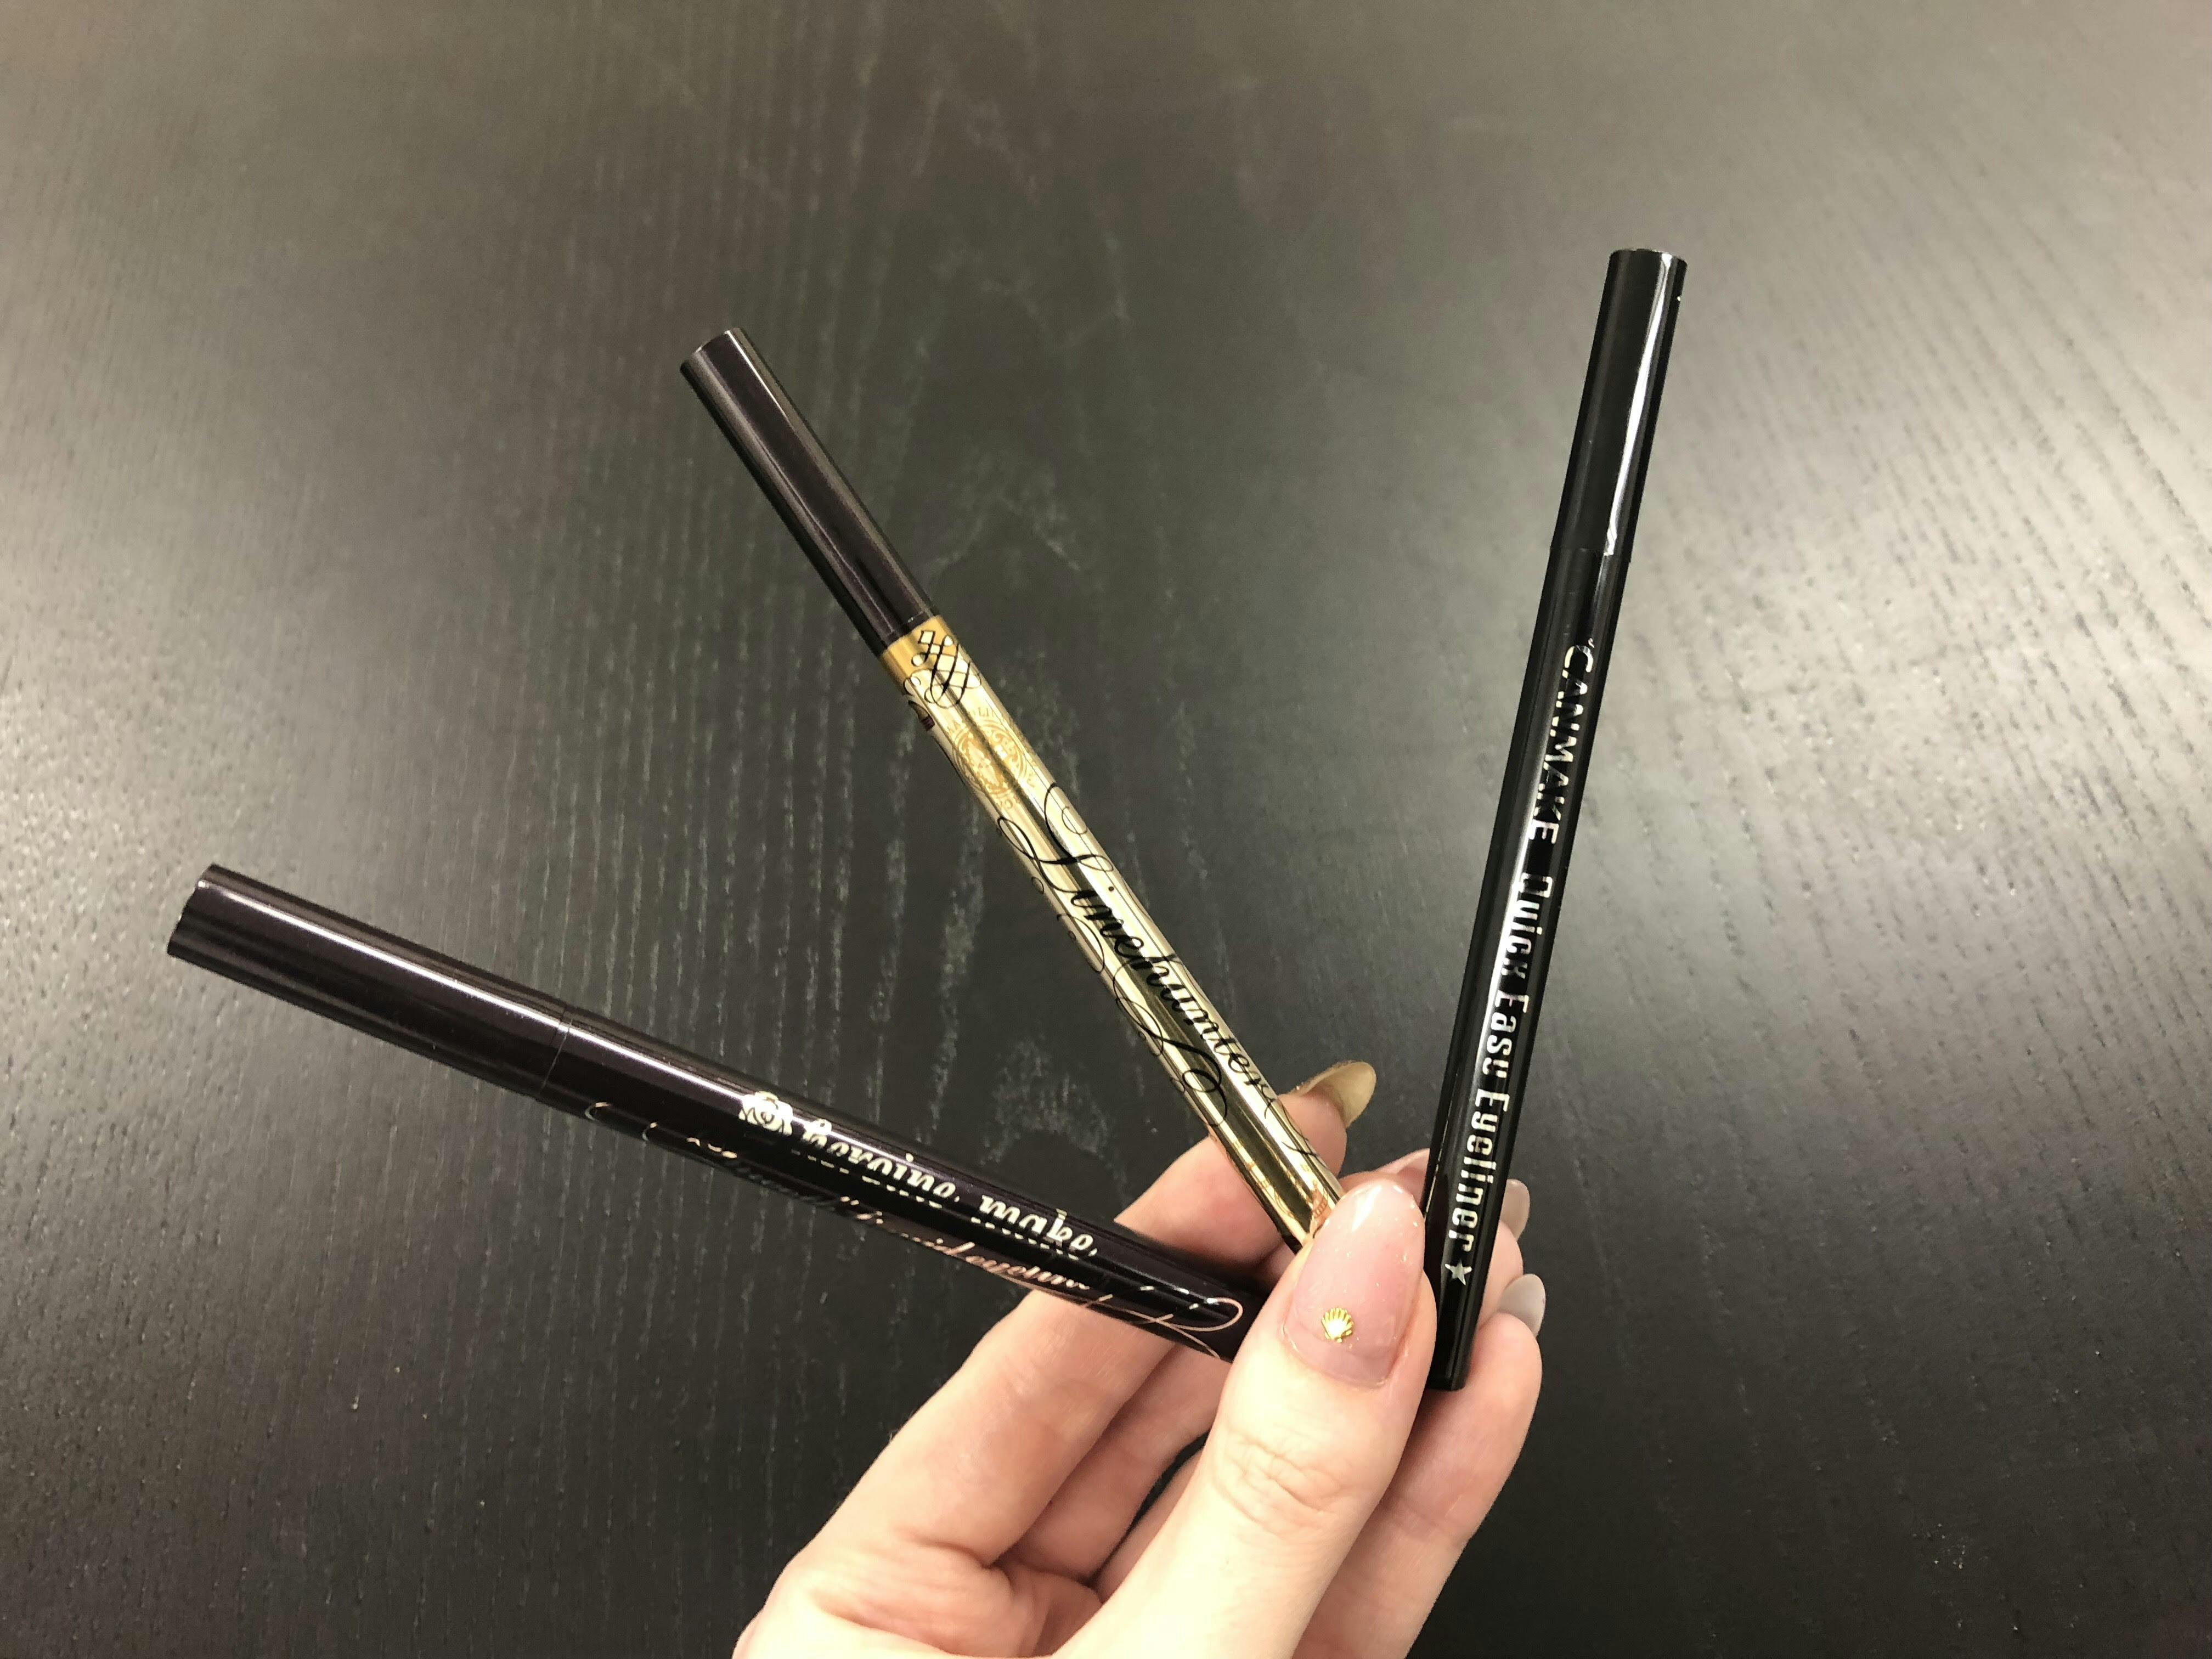 Smelte semester Machu Picchu We Compare 3 Top Japanese Eyeliners To See Which Is Best! | nomakenolife:  The Best Korean and Japanese Beauty Box Straight from Tokyo to Your Door!